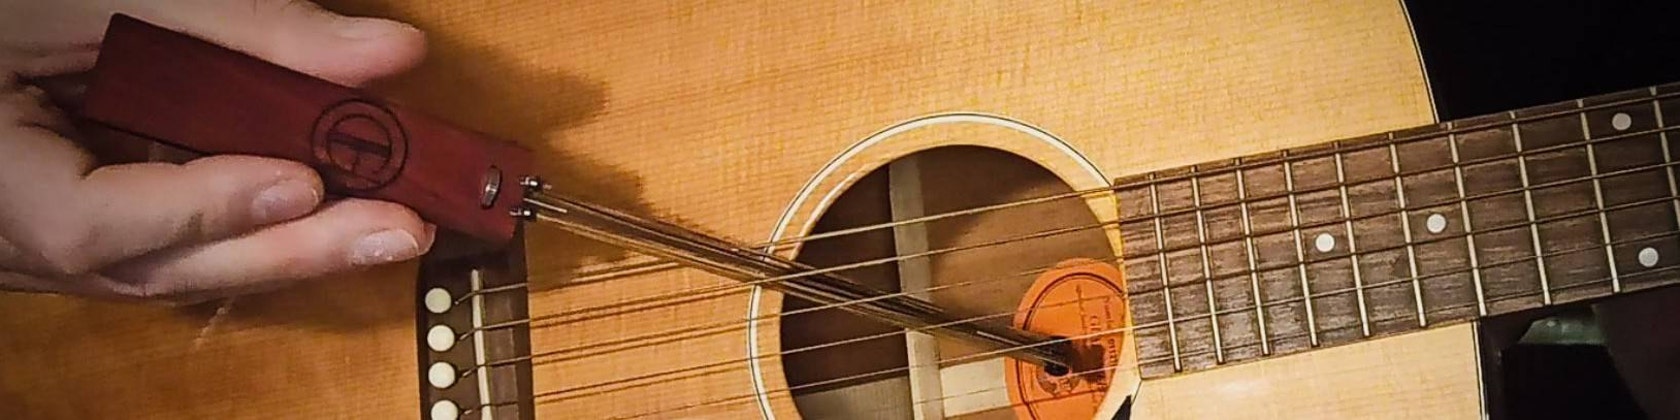 Pickaso Guitar bow for acoustic guitars - The Acoustic Guitar Forum